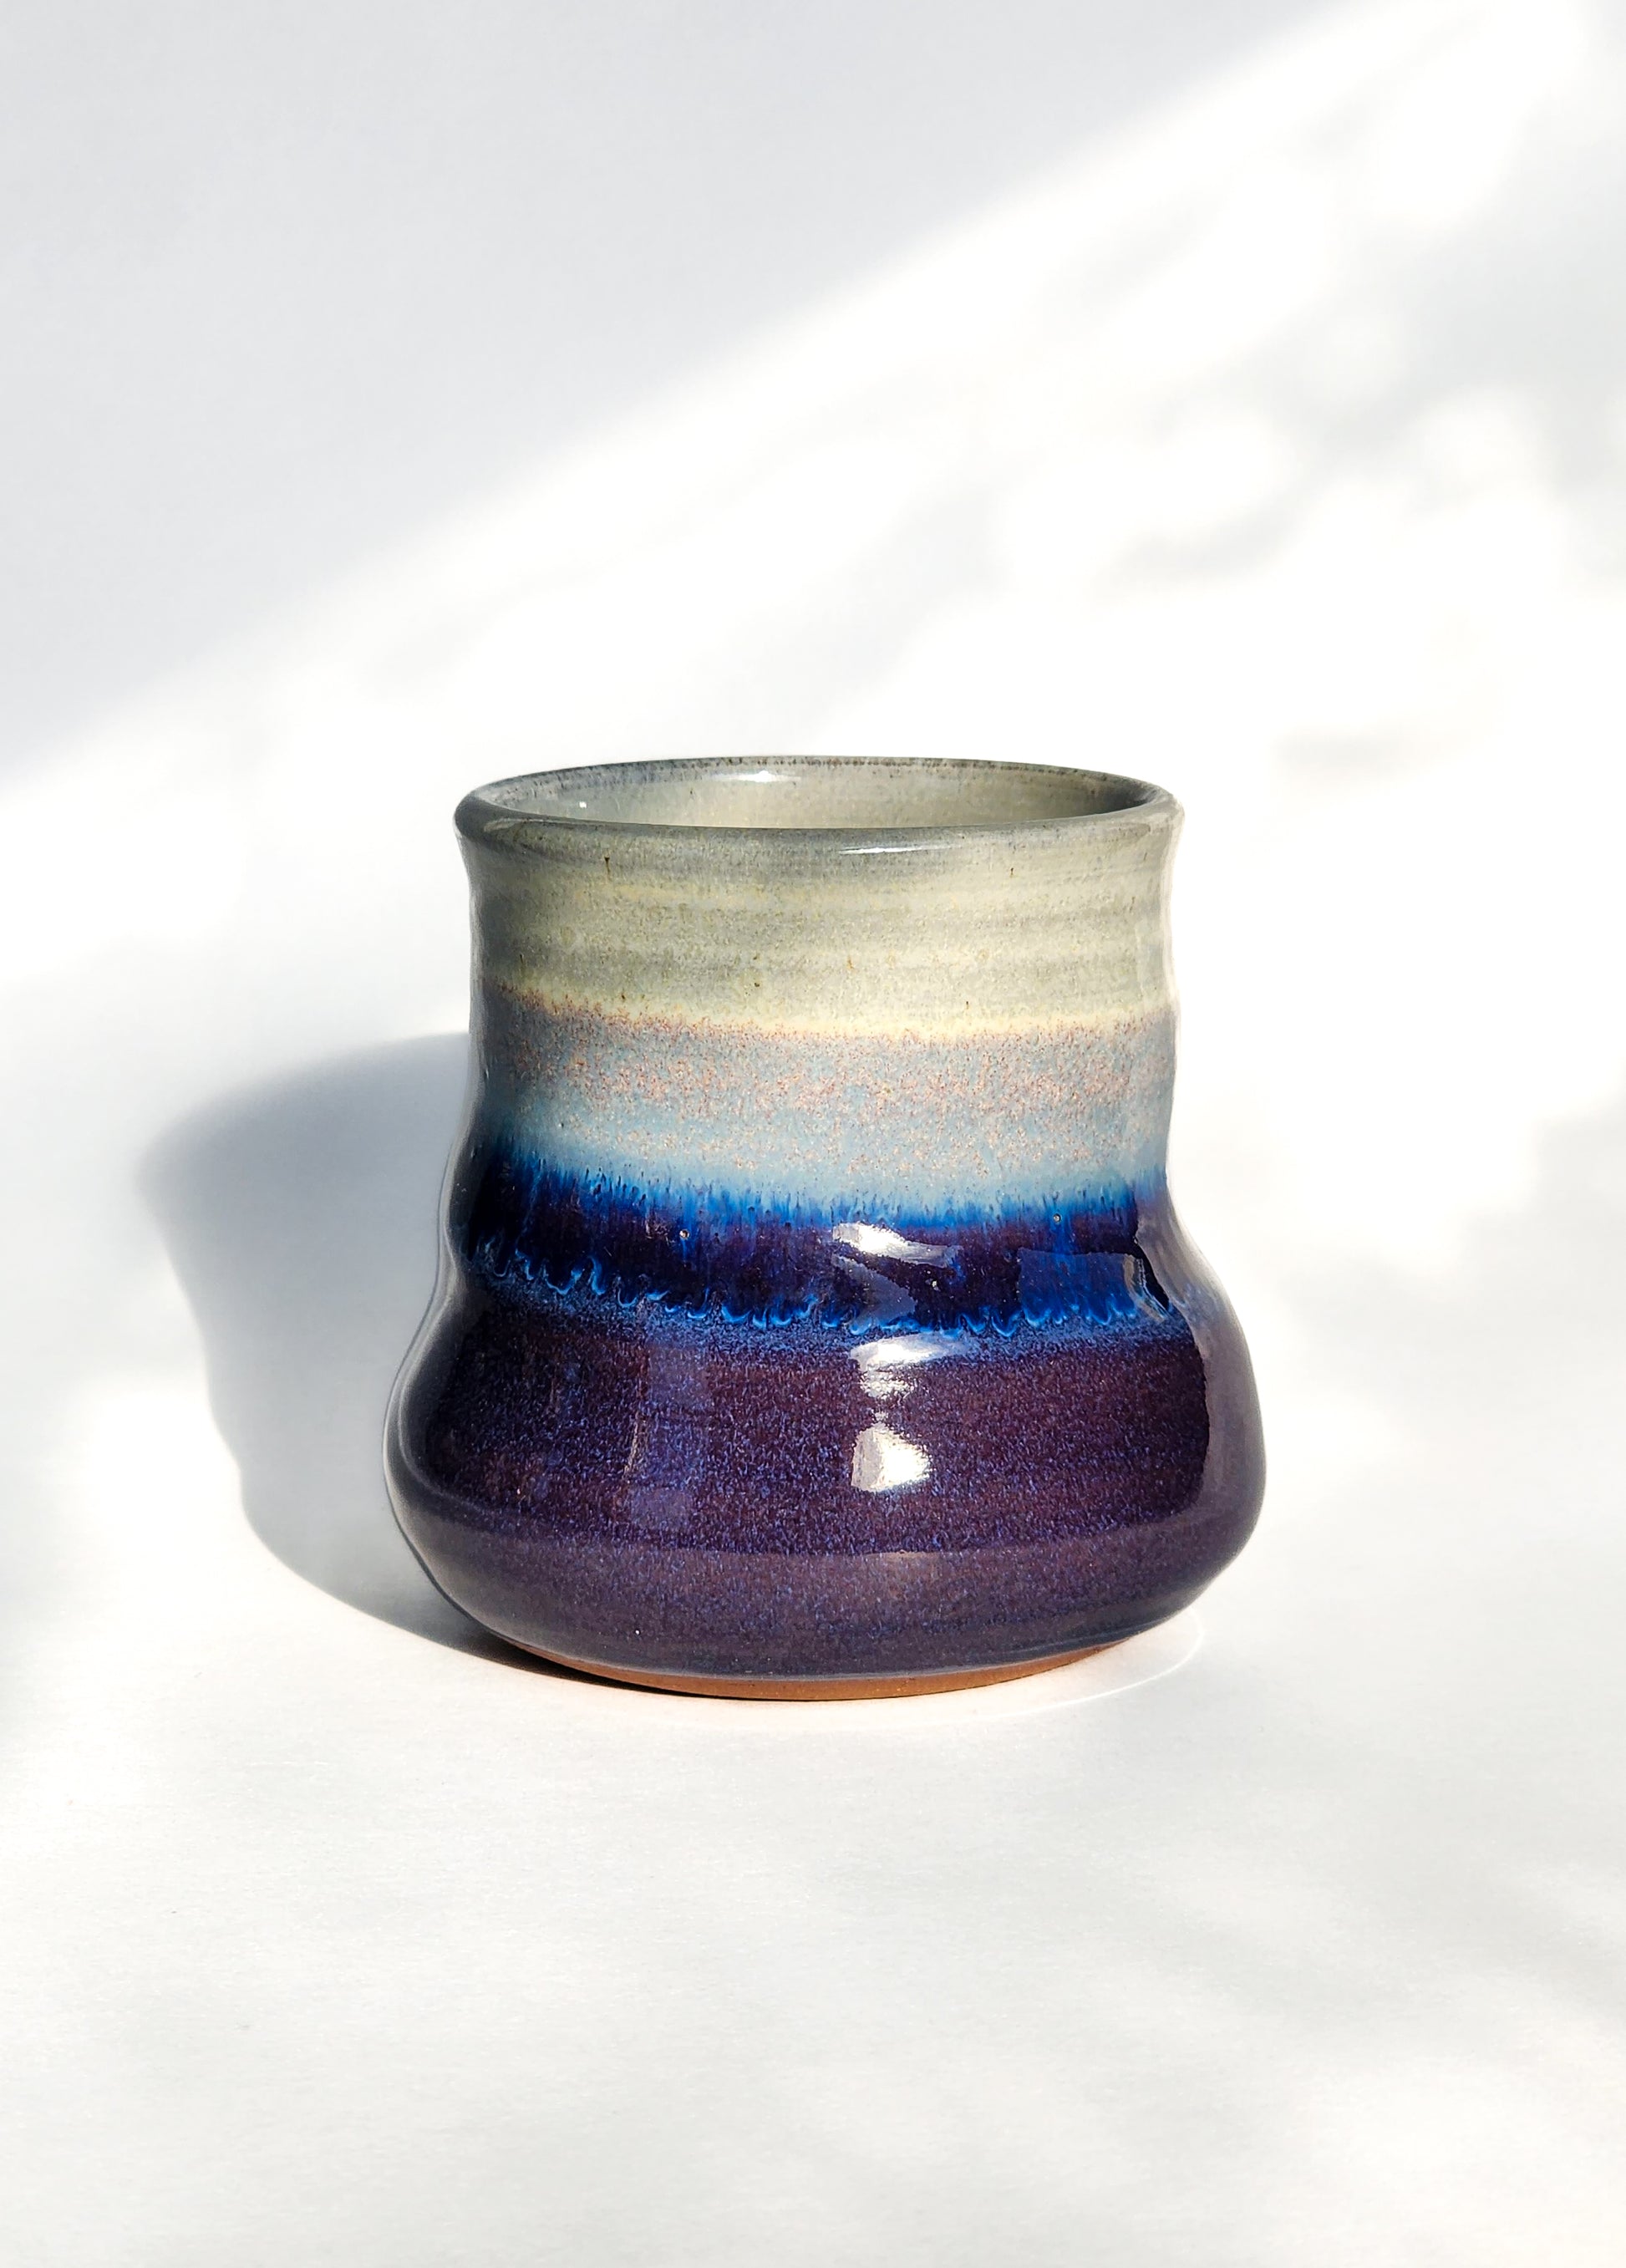 Image: Clinton Pottery's 8 oz Small Tumbler in Purple – A visually appealing addition with a cool, curvy design for a comfortable grip. This machine washable tumbler, crafted with care, adds contemporary elegance. The regal Purple color brings a touch of sophistication, reminiscent of royal richness and artistic flair.